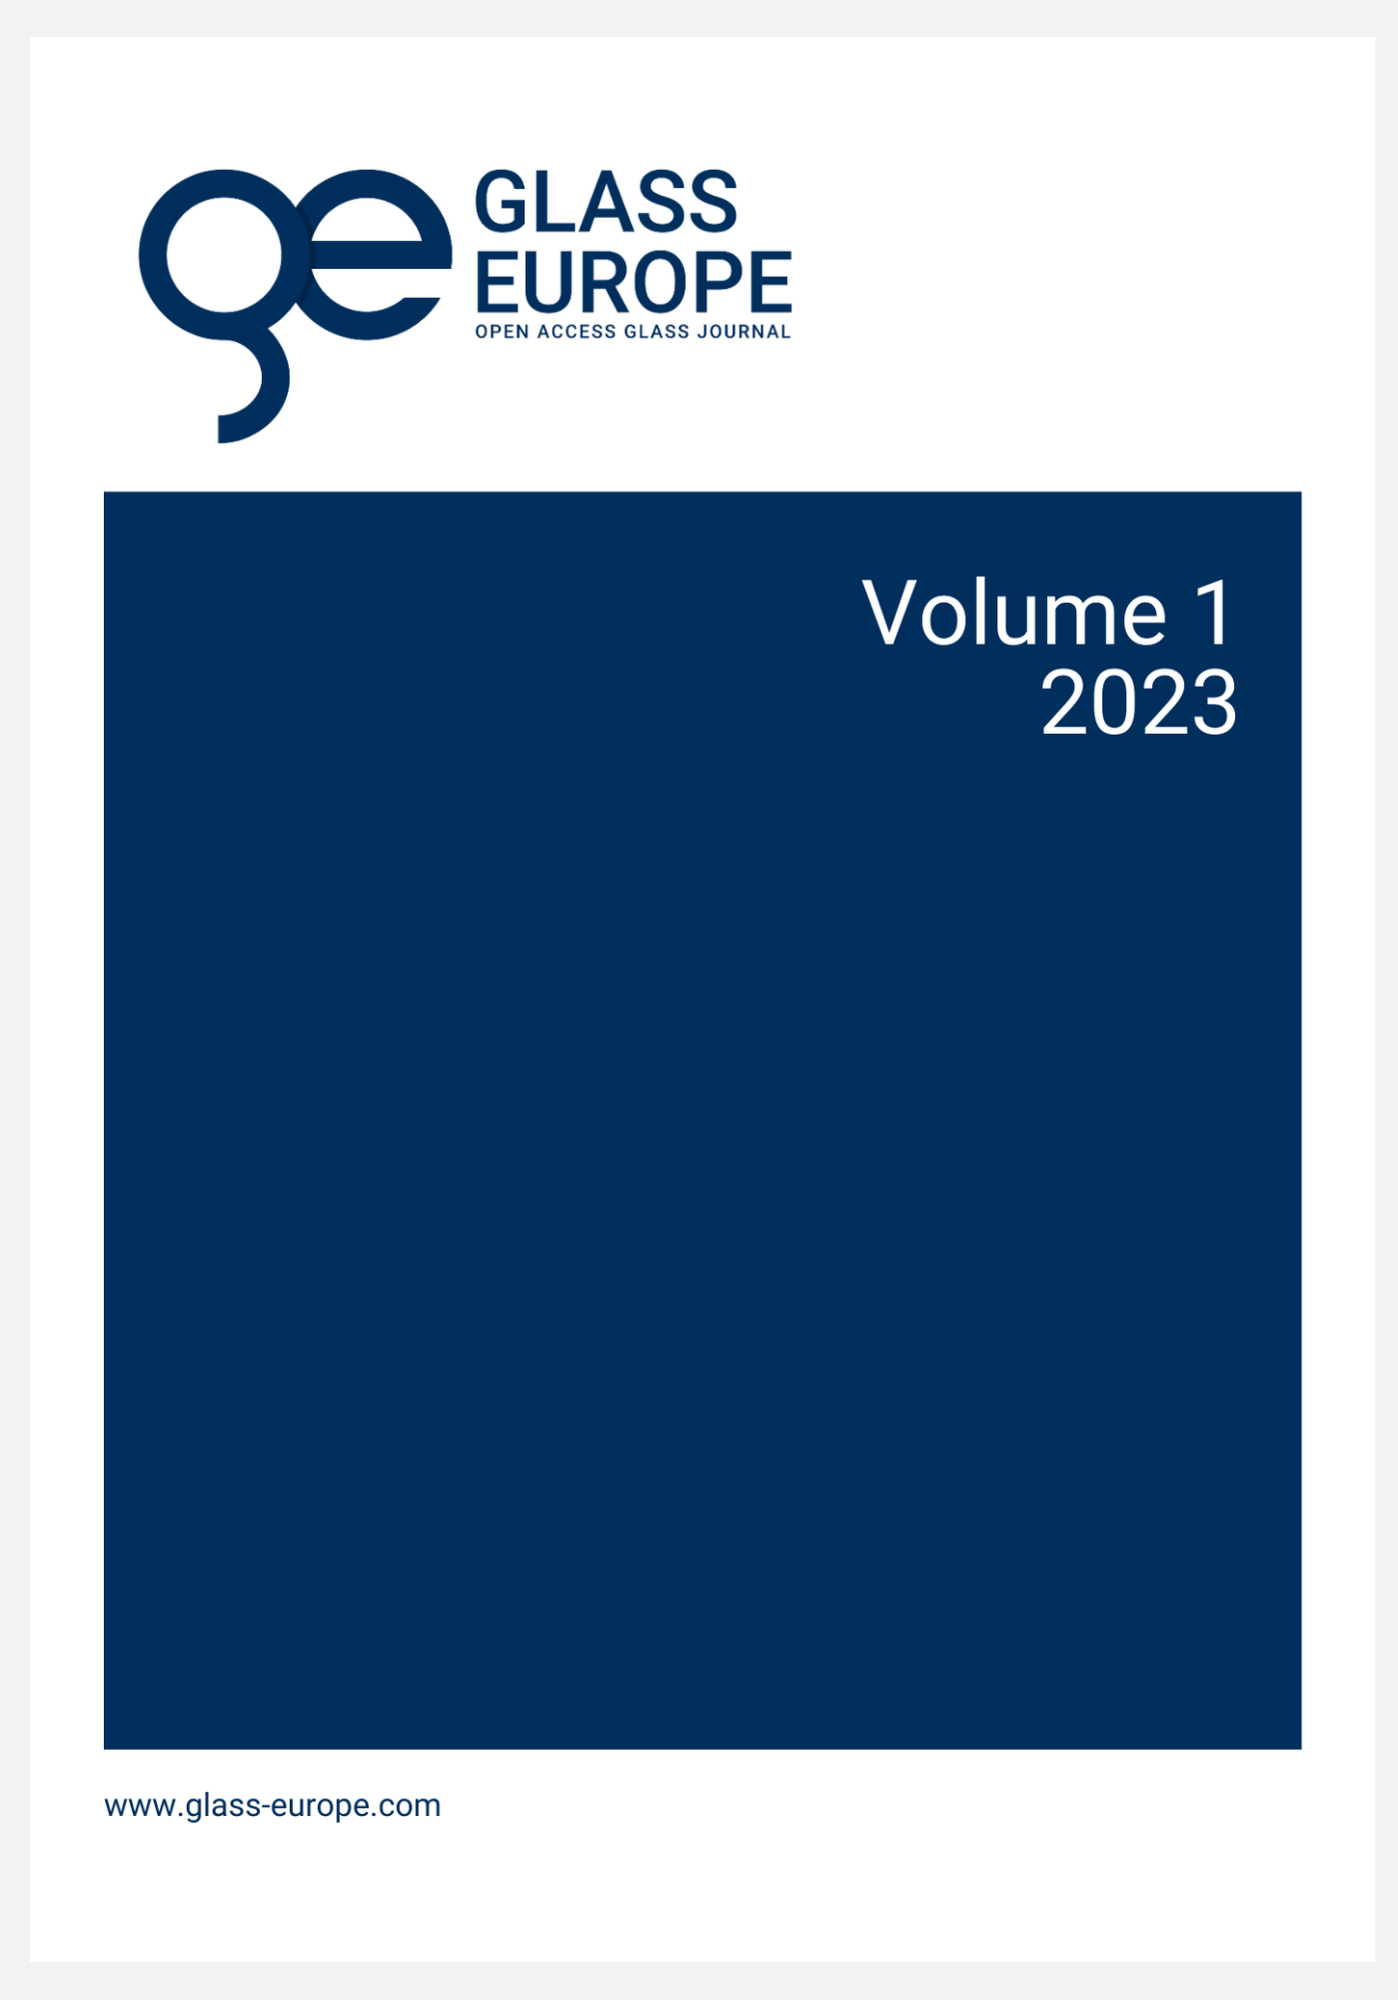                     View Vol. 1 (2023): Glass Europe Articles (Ongoing Publication)
                